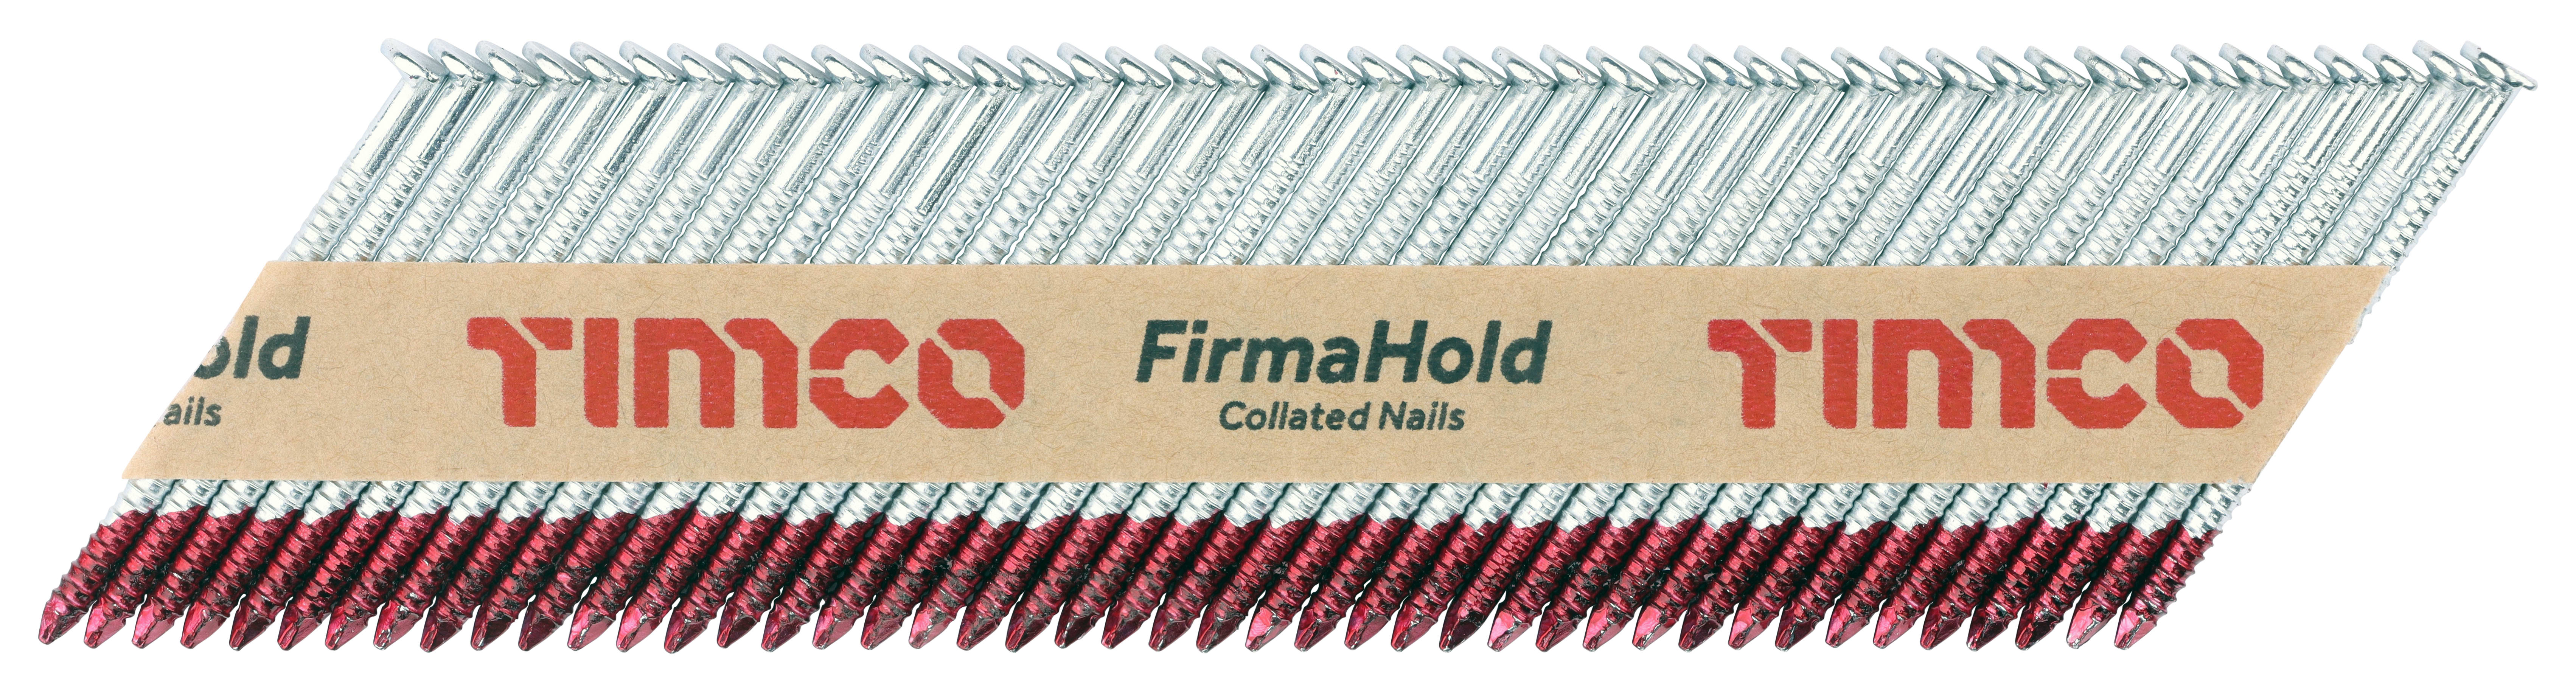 FirmaHold Ring Shank FirmaGalv Collated Clipped Head Nails